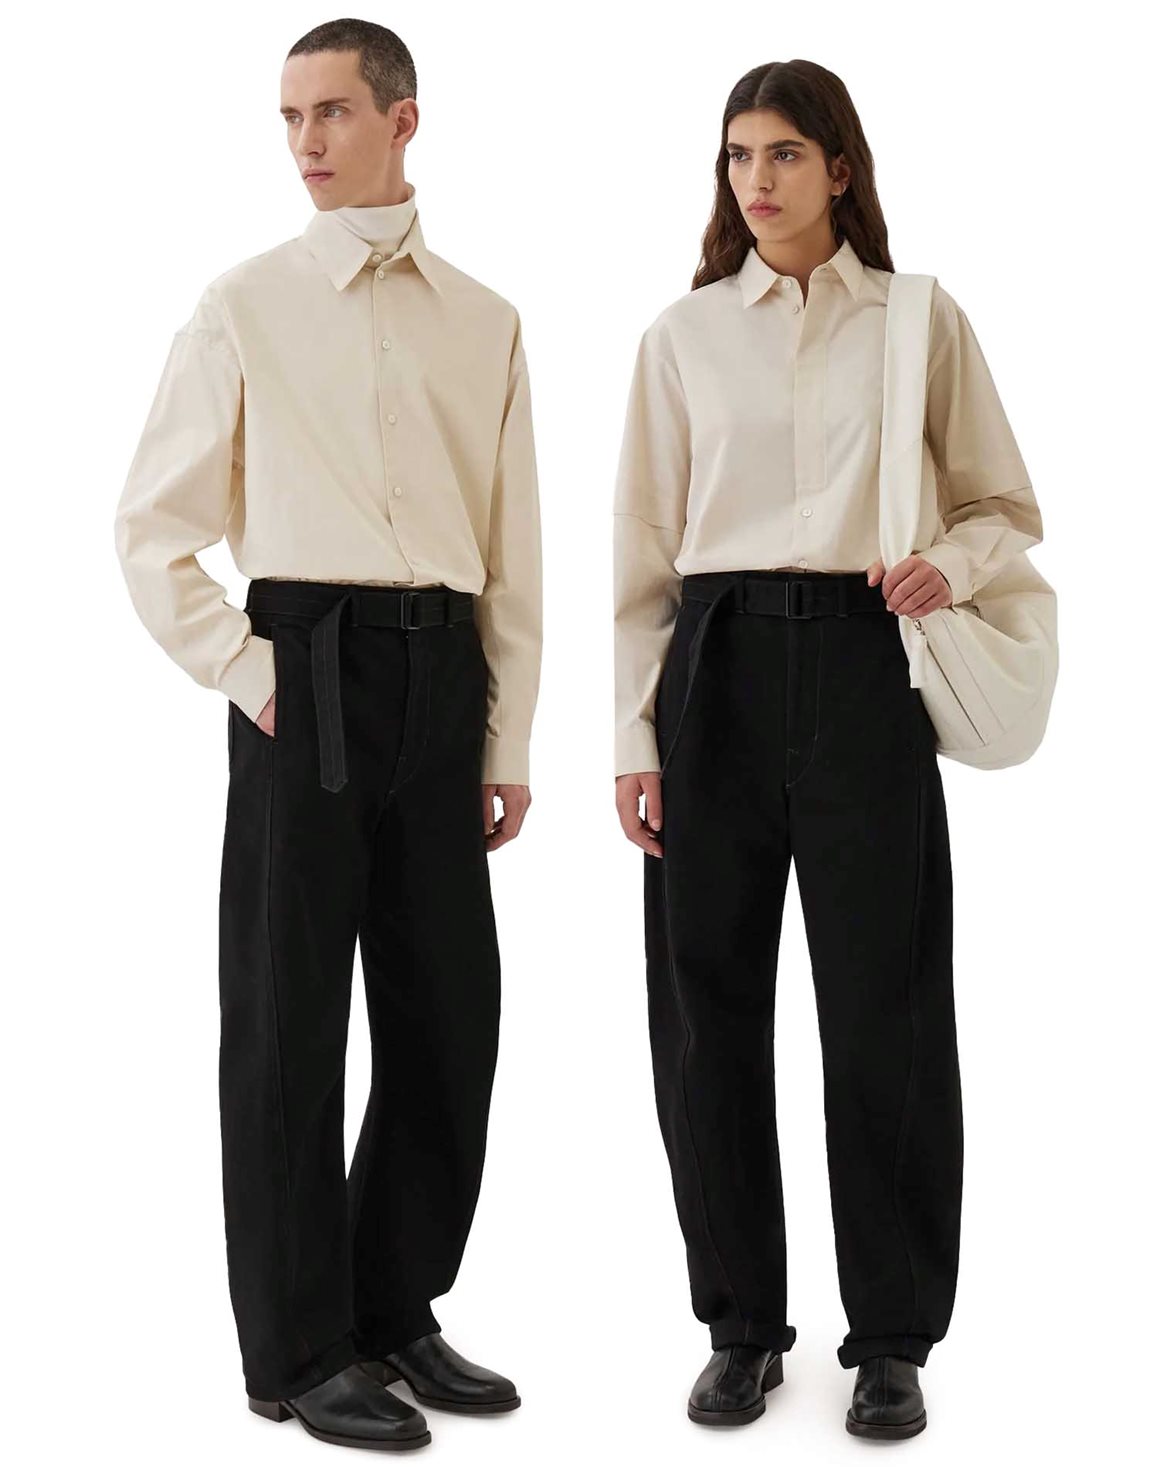 Lemaire Twisted Belted Pants Black - Vallgatan 12